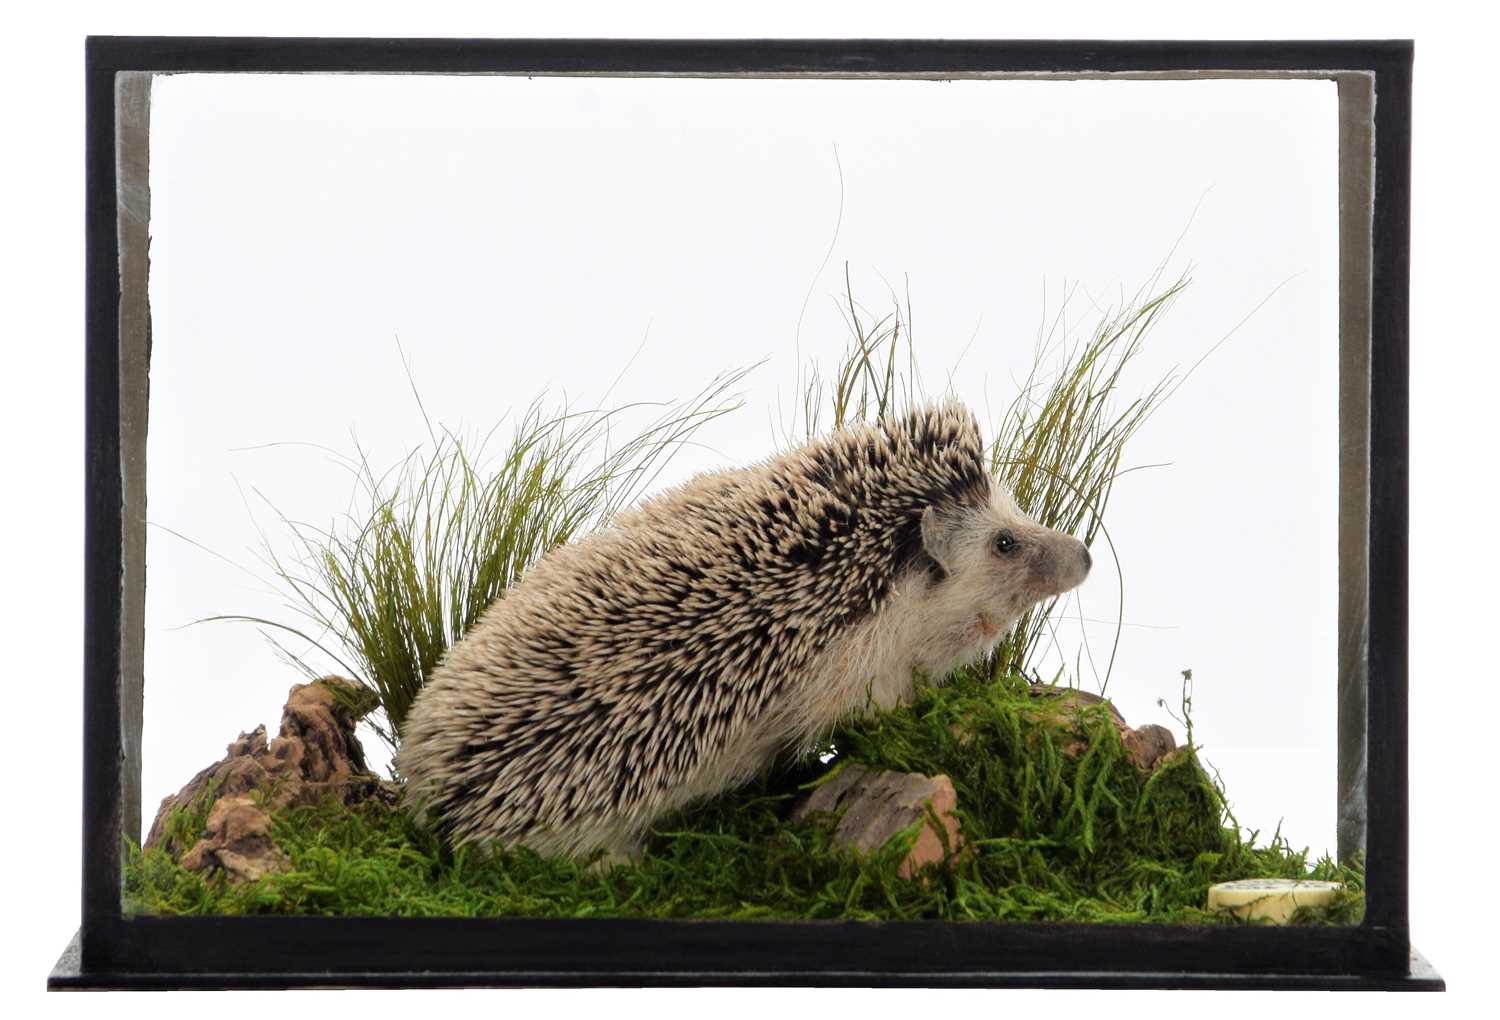 Taxidermy: A Cased Four-toed or Pygmy Hedgehog (Atelerix albiventris), captive bred, 2014-2016, a